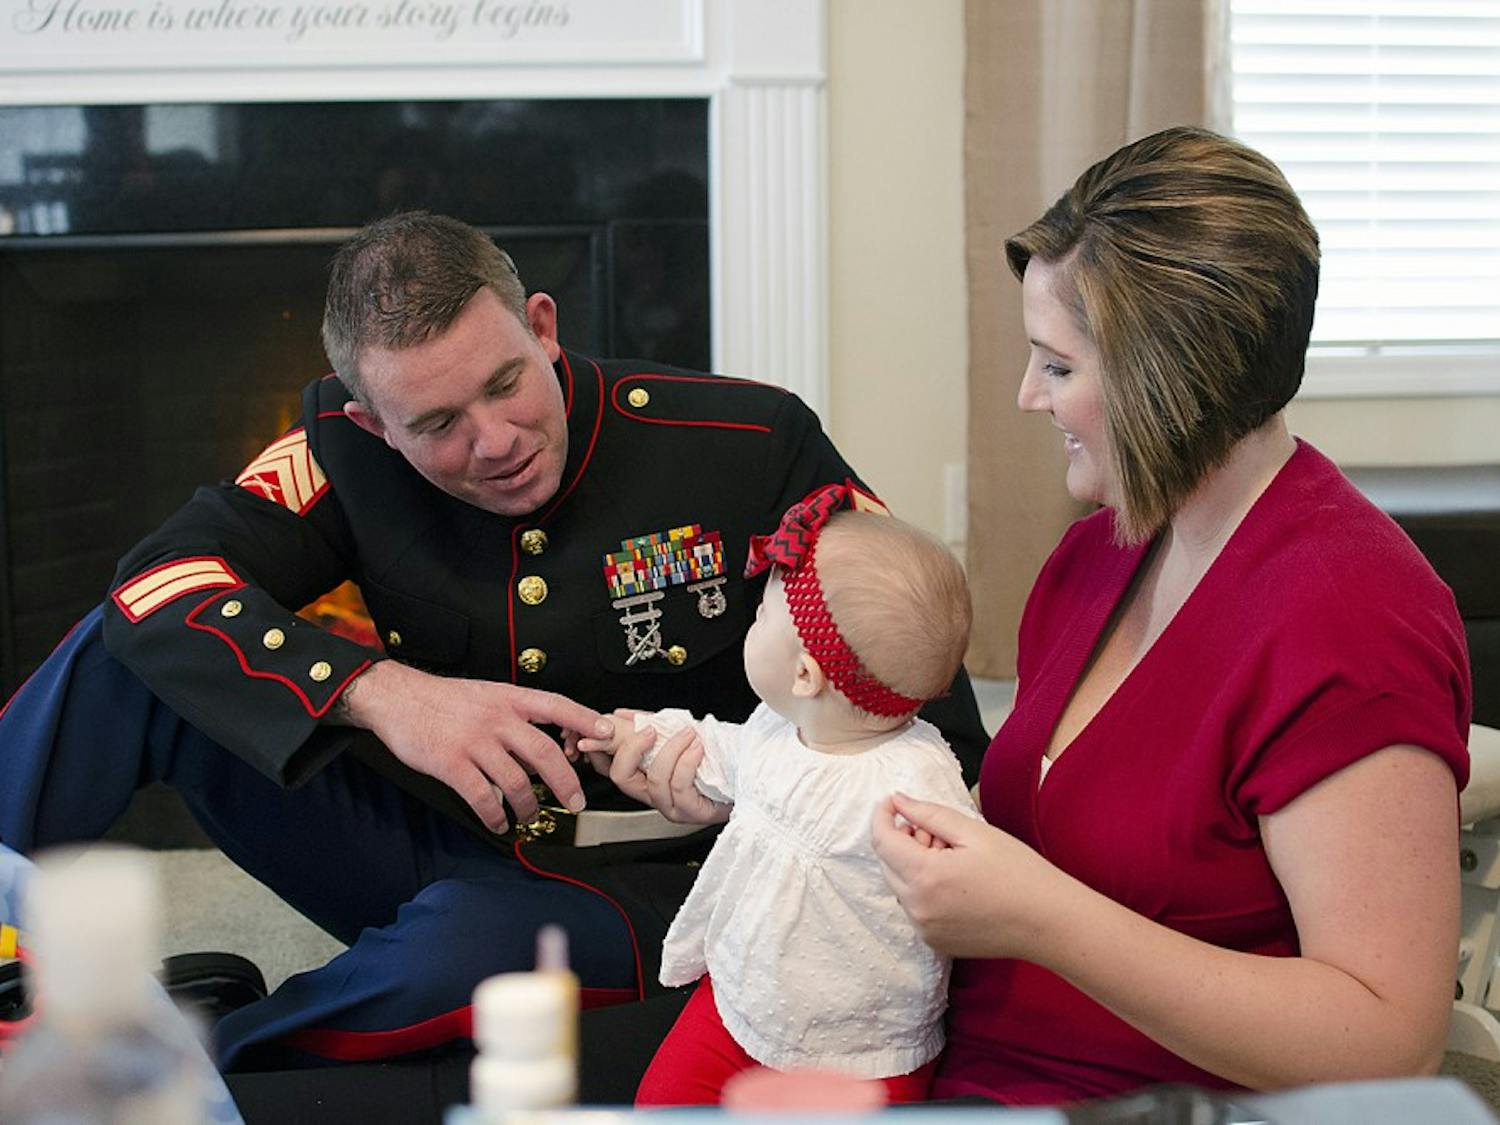 Marine Corps veteran Dac Carpenter and his wife Holly play with their daughter. An implant let Dac Carpenter regain all of the hearing in his left ear.